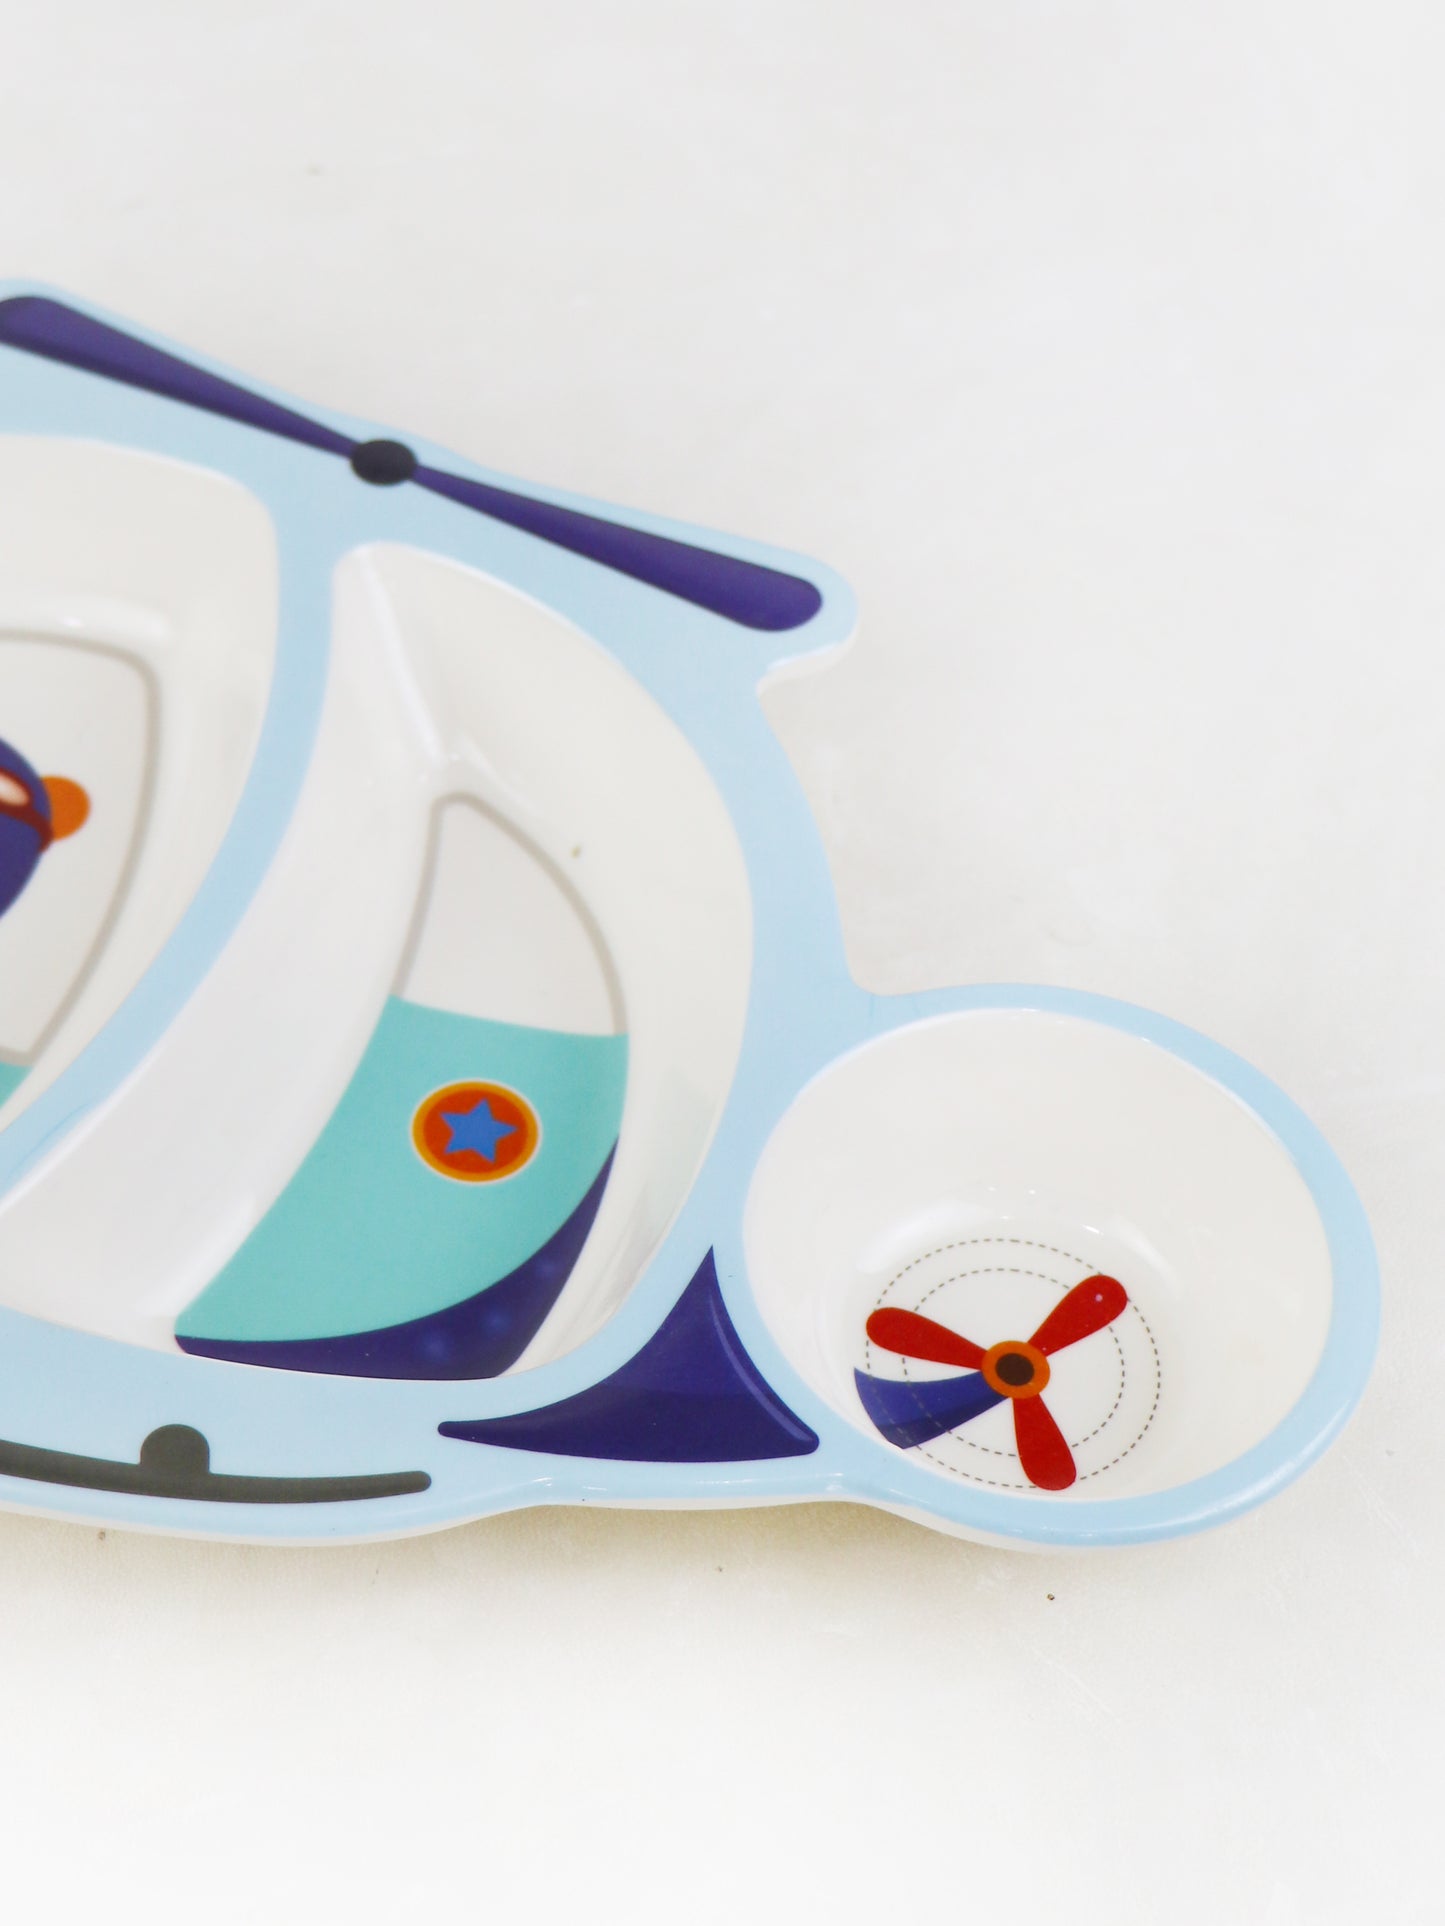 Helicopter Shaped 3-Compartment Melamine Tray Sky Blue